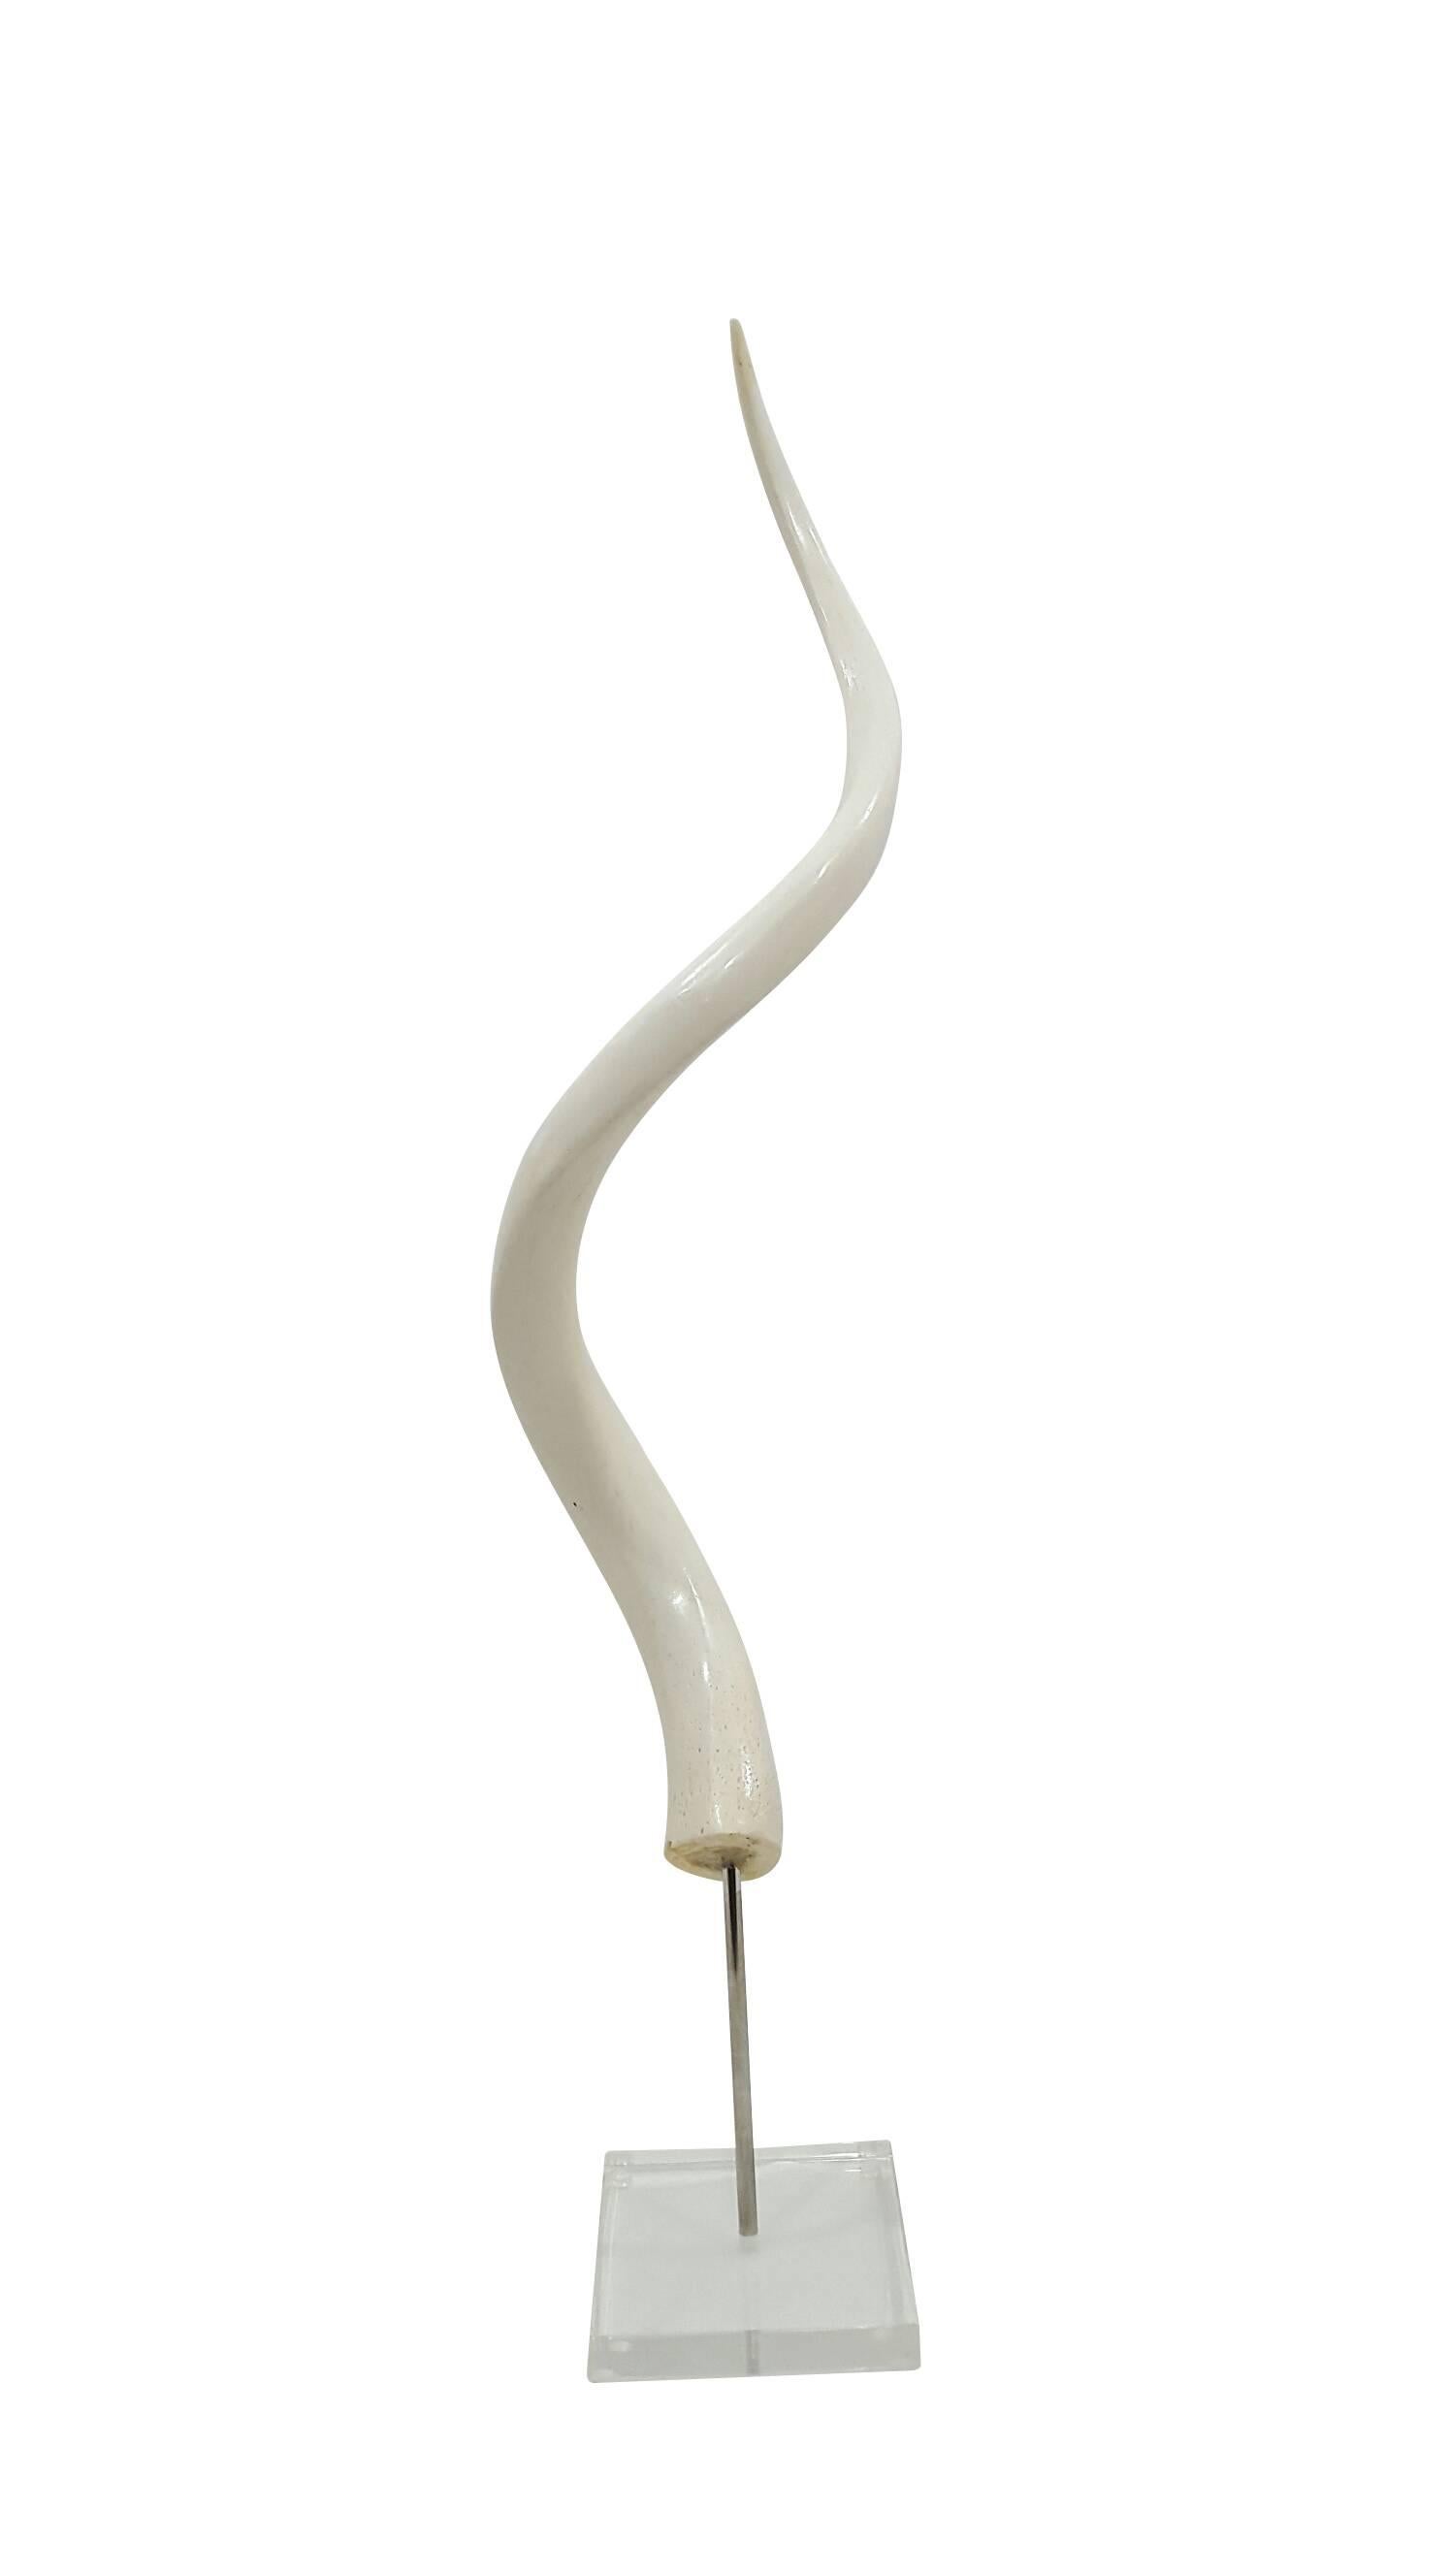 Beautiful kudu horn on acrylic stand white
Dimensions: Stand 5" x 5" , total height 33".
Color & Size vary